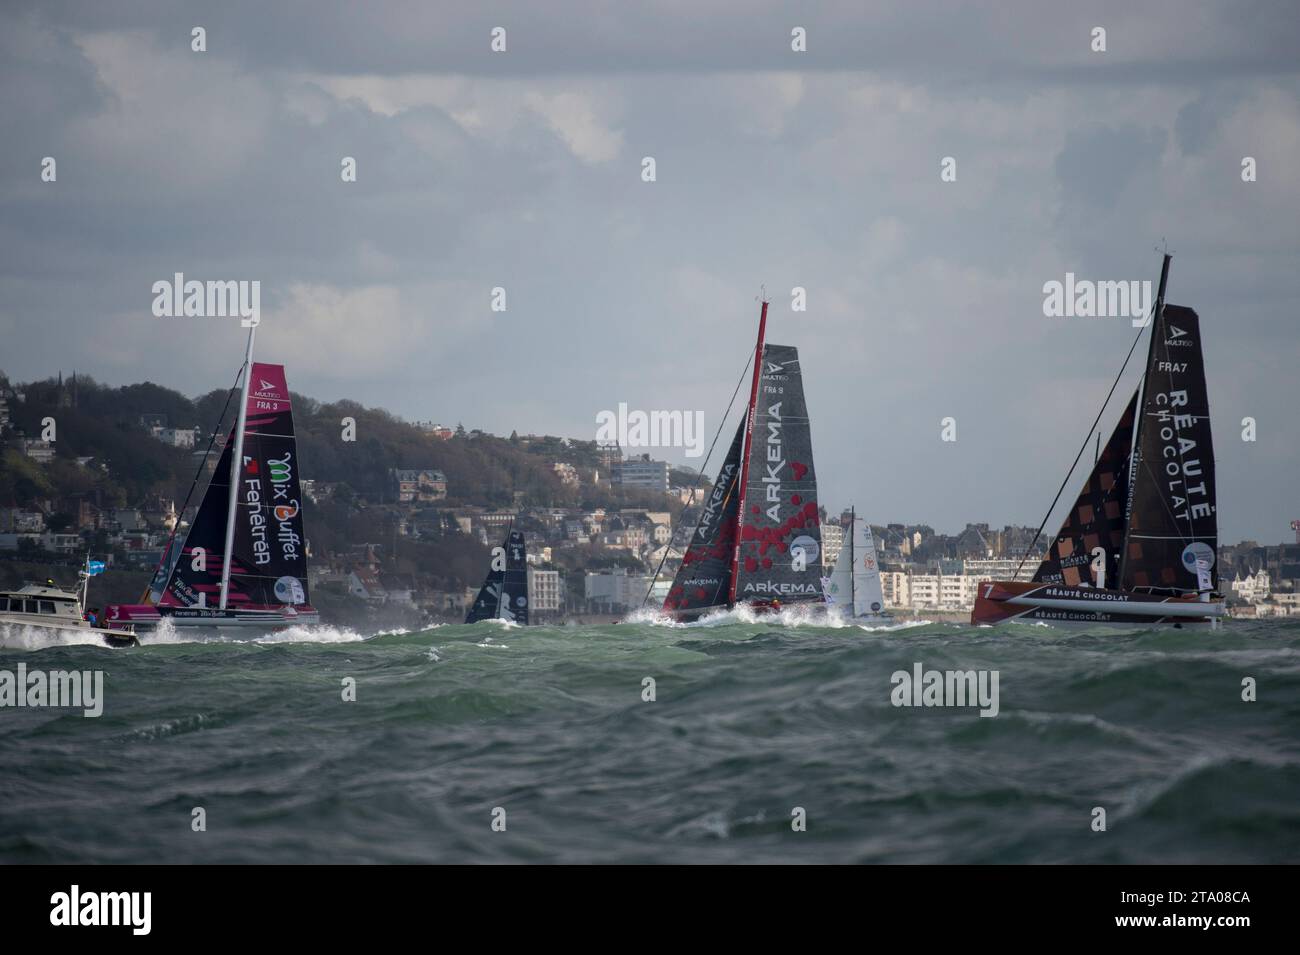 Multi50 Class with FenêtréA Mix Buffet, Erwan LE ROUX and Vincent RIOU, Arkema, Lalou ROUCAYRIOL and Alex PELLA, Réauté Chocolat, Armel TRIPON and Vincent BARNAUD during the start of the Transat Jacques Vabre sailing race on November 5, 2017 at Le Havre, France - Photo Olivier Blanchet / DPPI Stock Photo